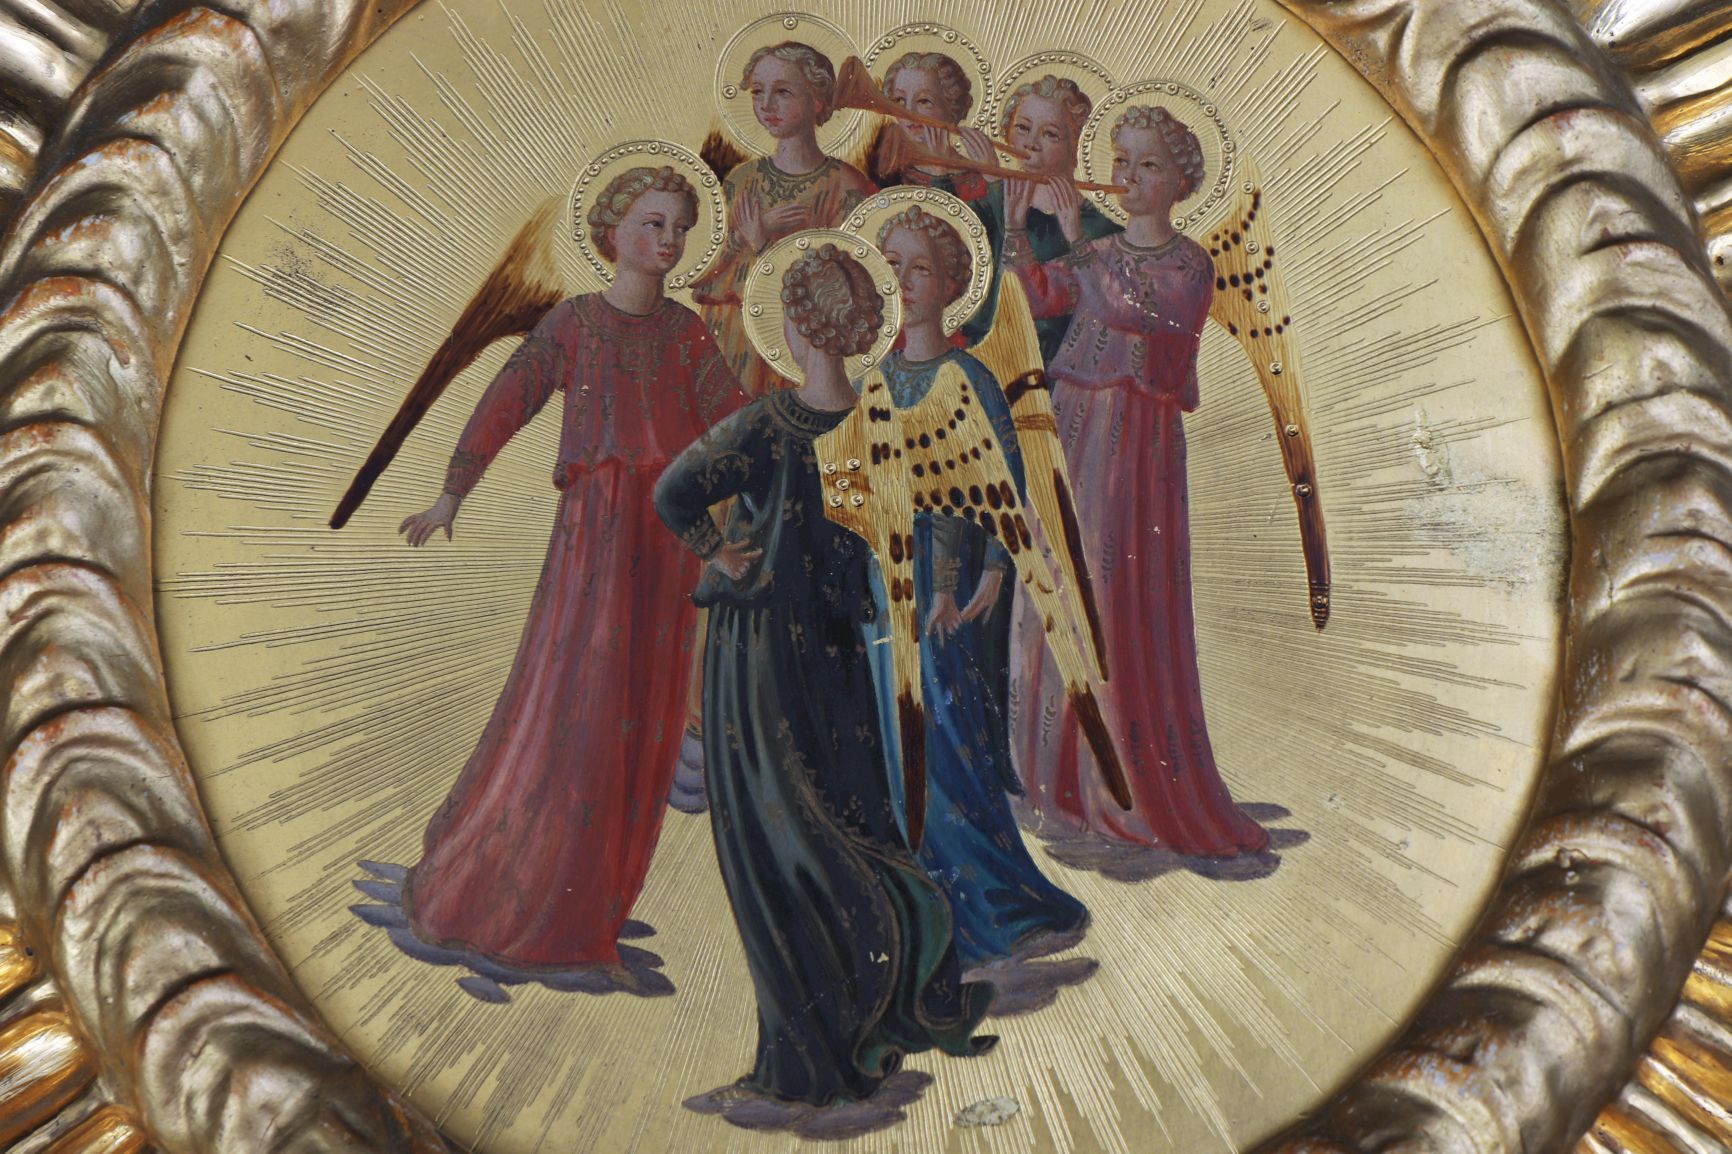 Kopie nach FRA ANGELICO - Image 2 of 3